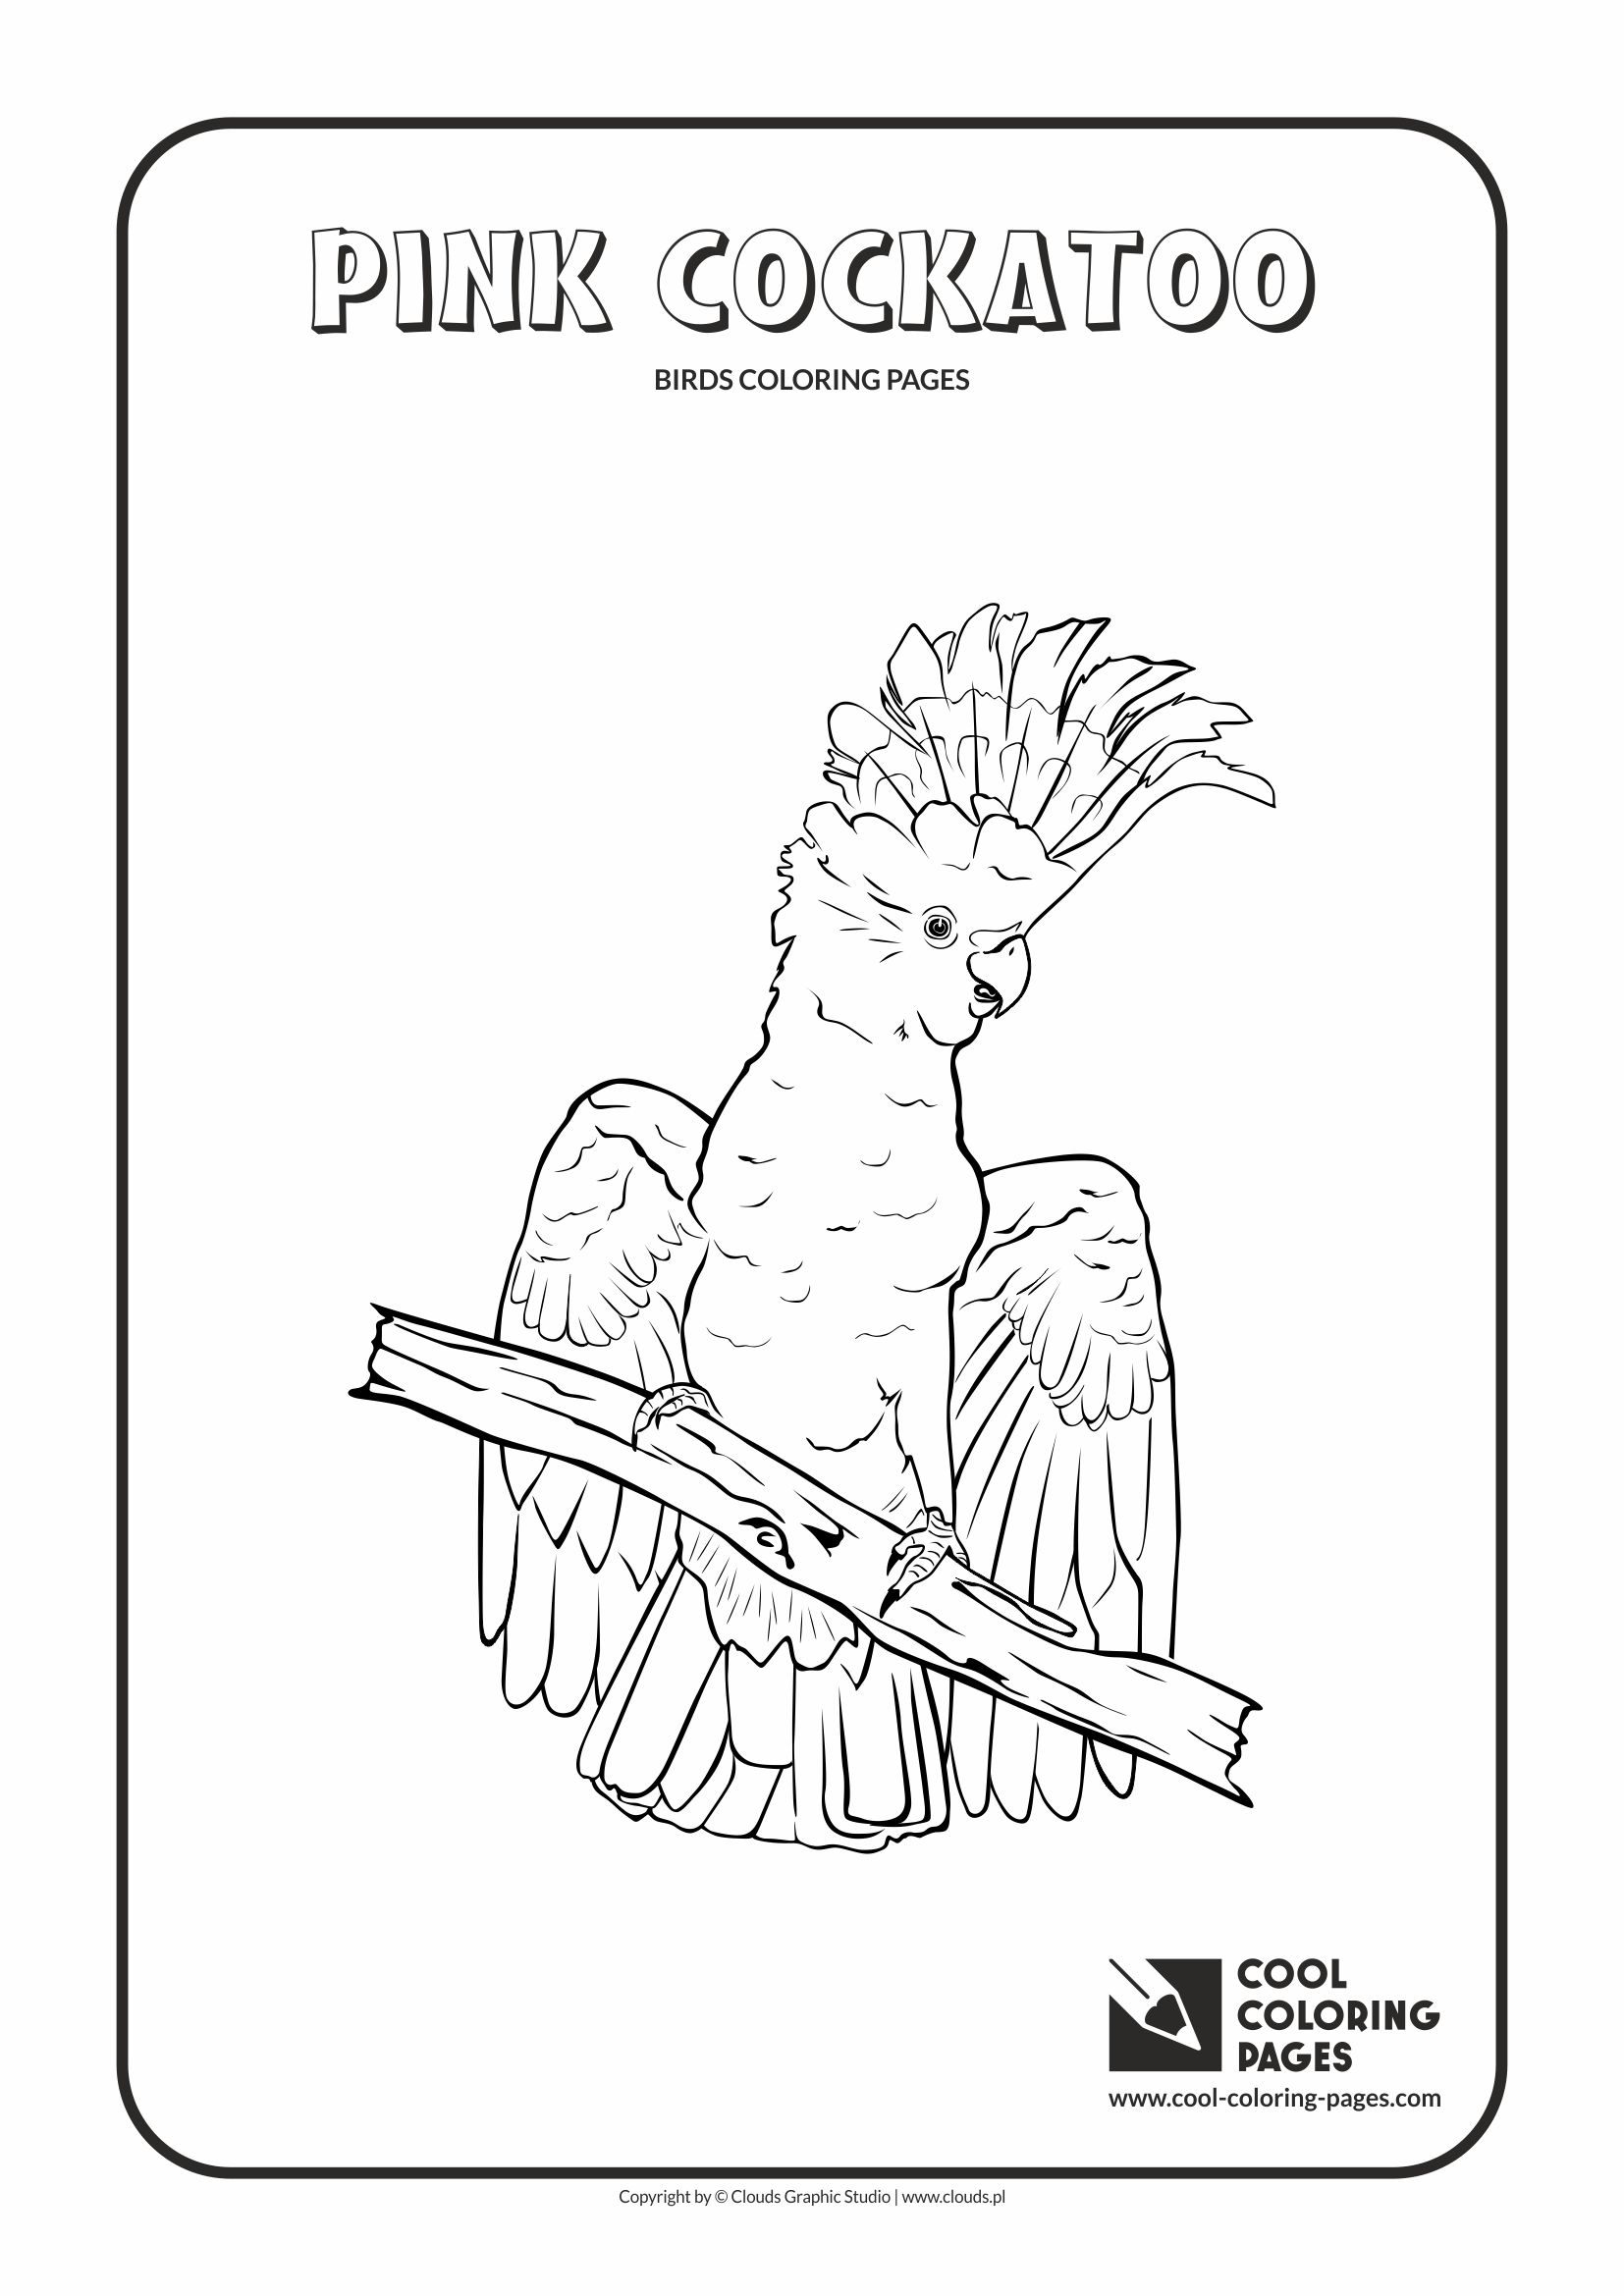 Cool Coloring Pages - Animals / Pink cockatoo / Coloring page with pink cockatoo